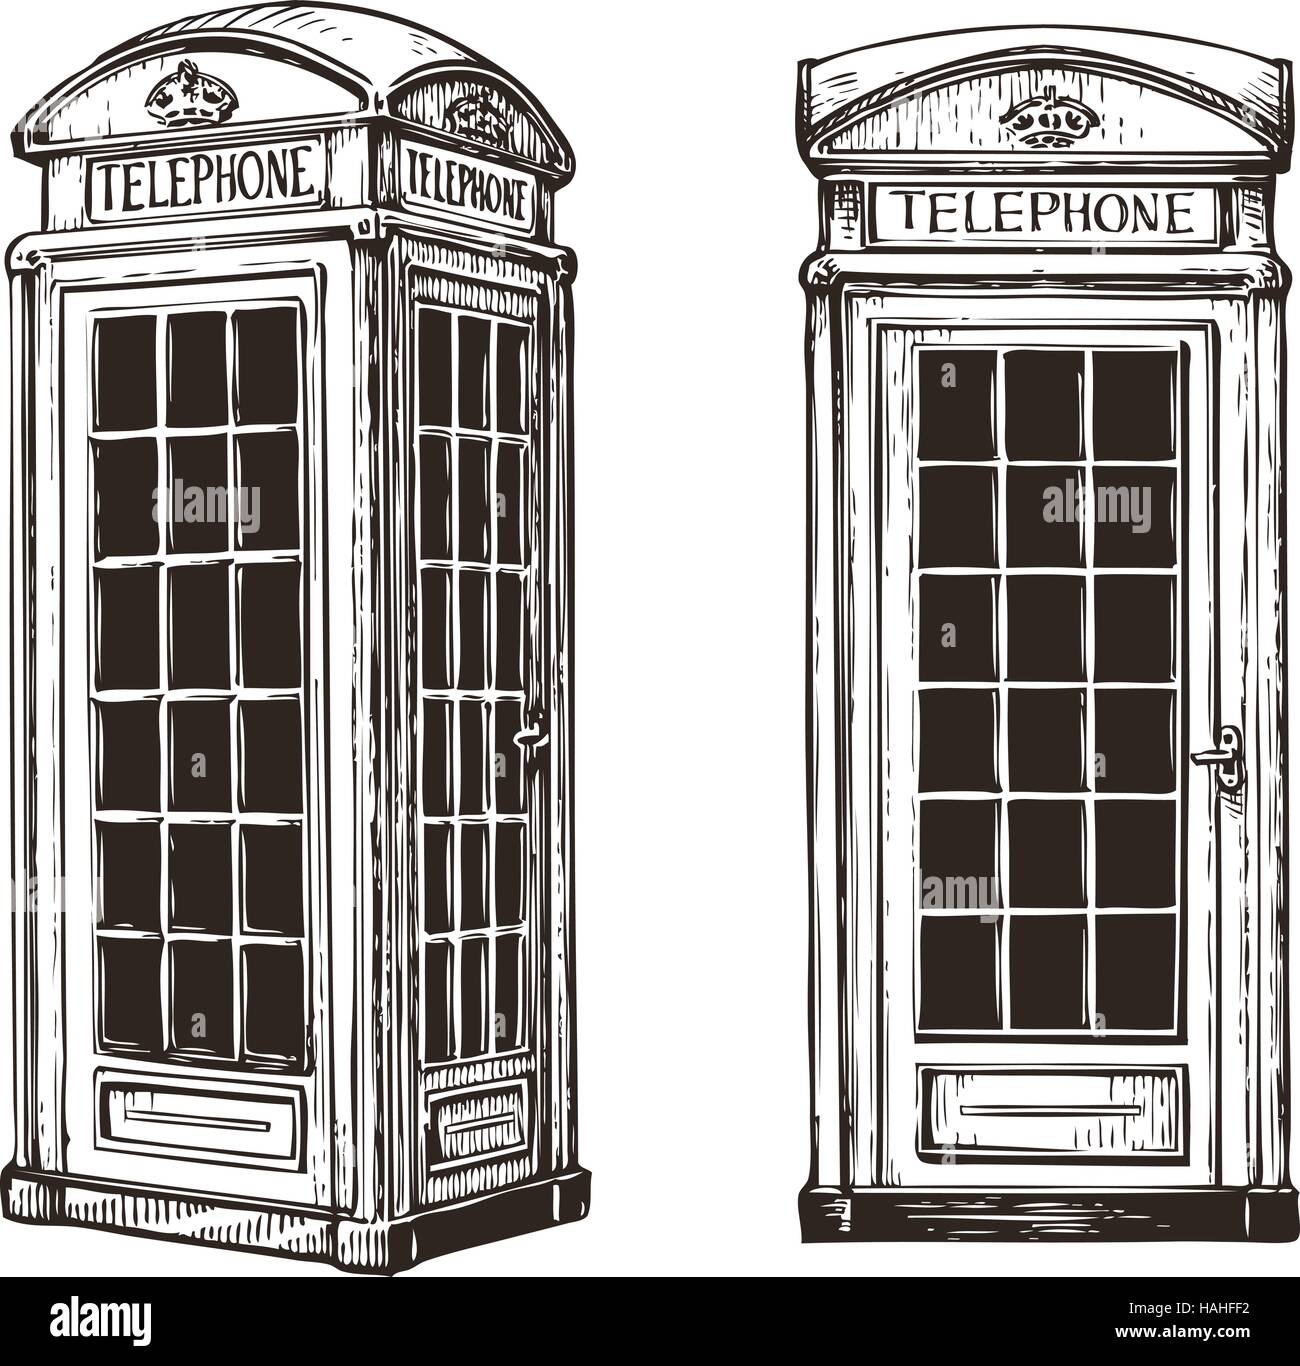 Hand drawn London phone booth. Sketch vector illustration Stock Vector